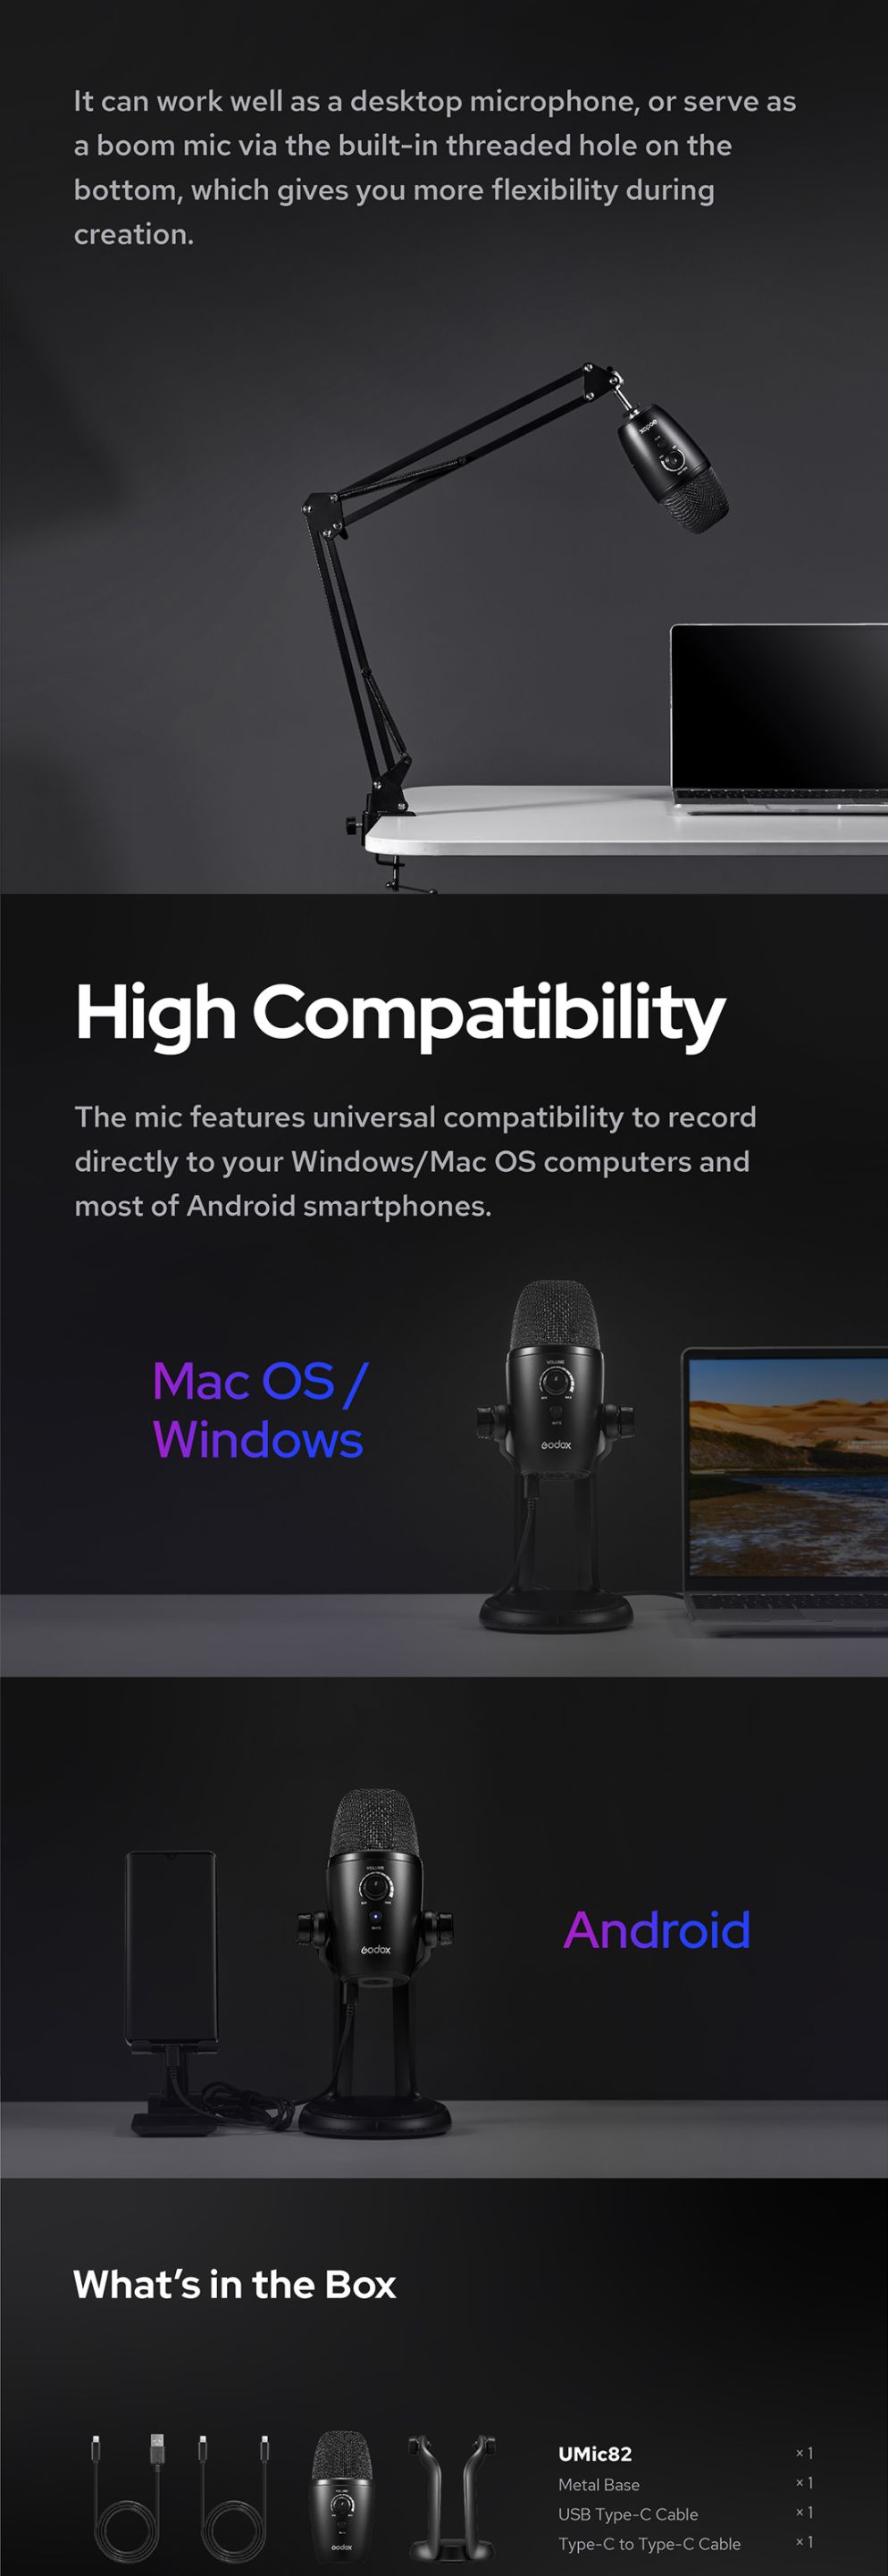 High compatibility